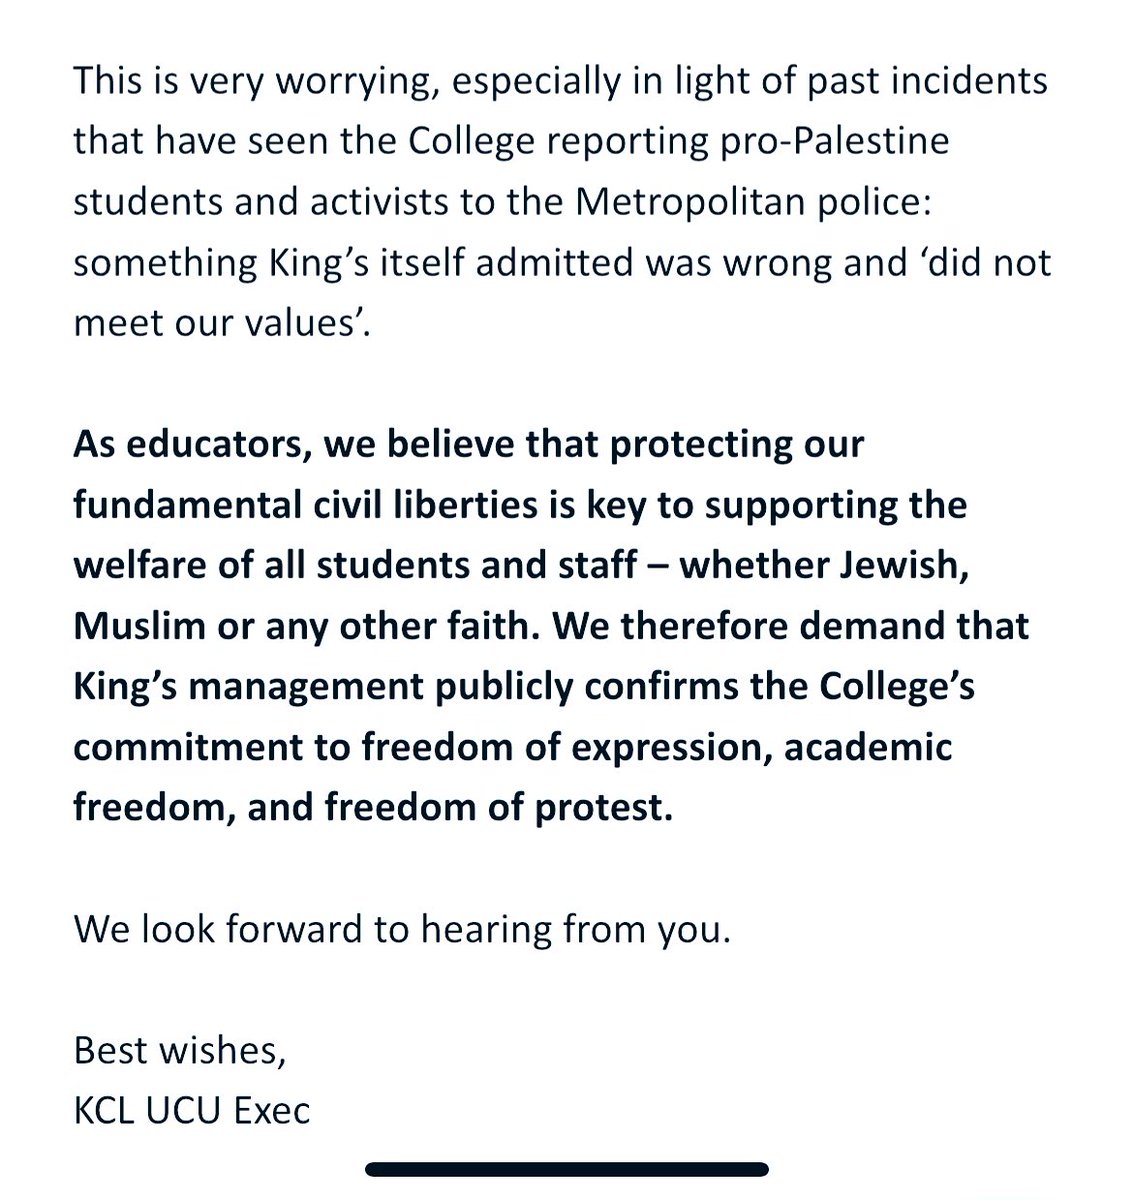 Today we wrote to Kings management expressing our concerns about the Government’s attempts to restrict academic freedom, freedom of expression & protest while supporting Israel’s crimes against Palestinians. We demand the College confirms its commitment to guarantee such freedoms